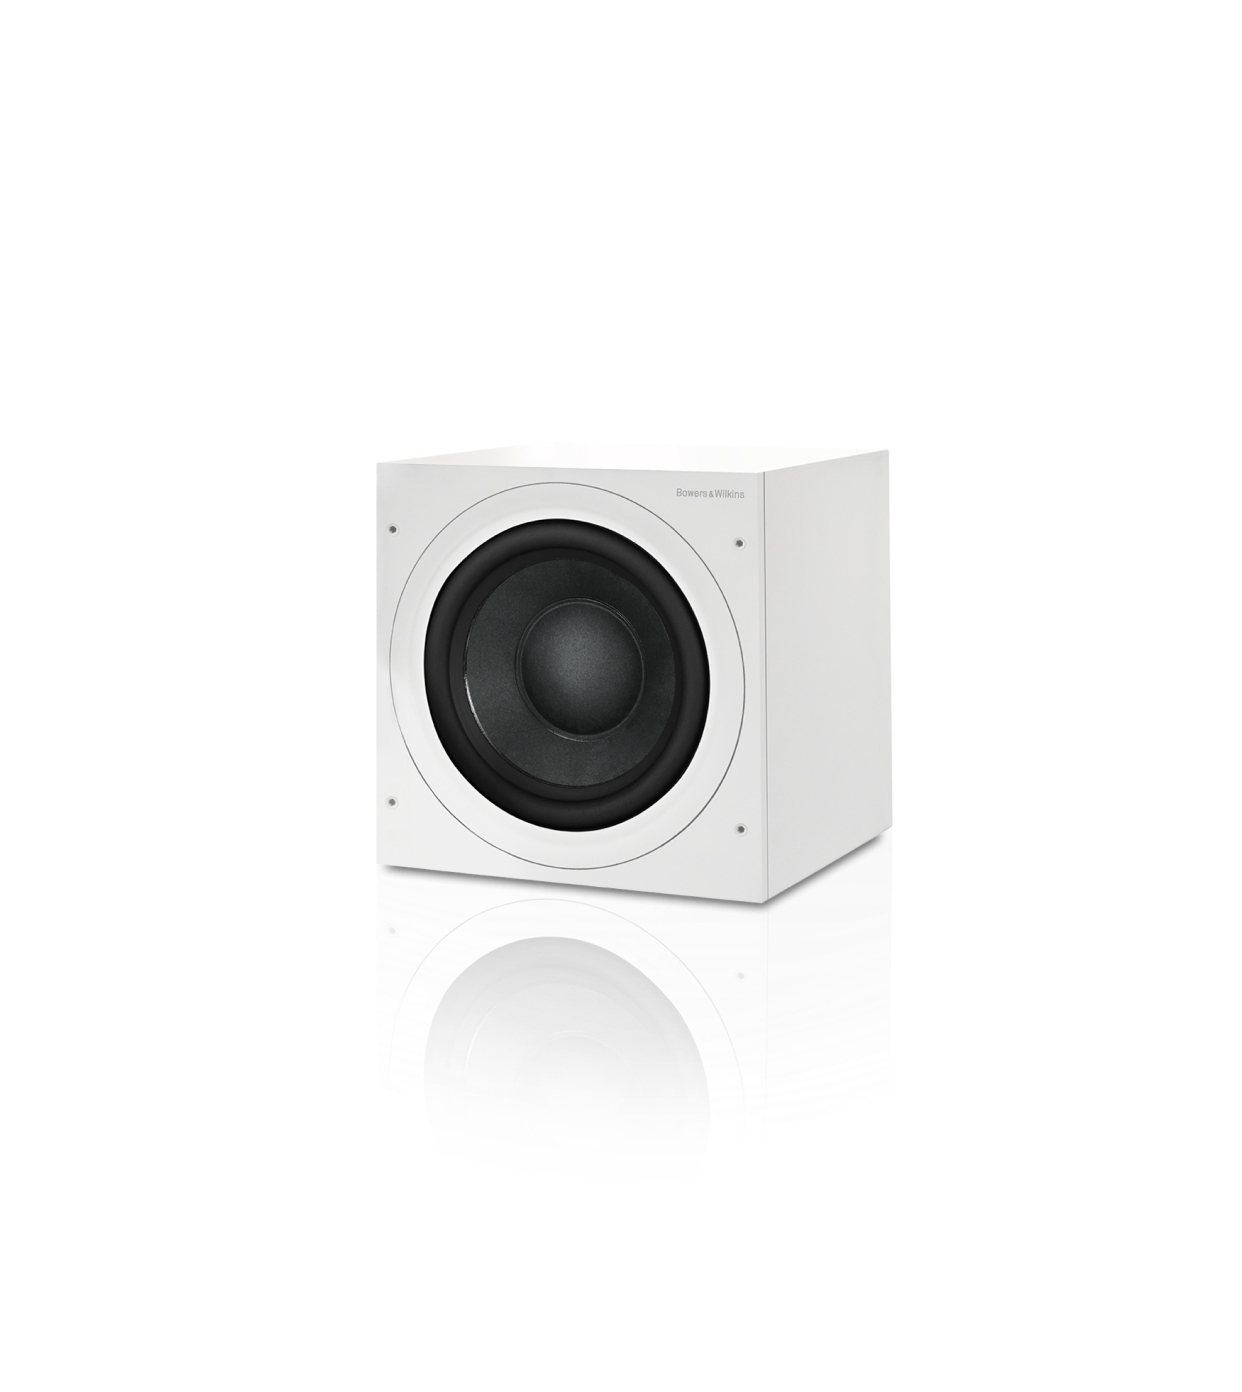 Bowers & Wilkins ASW608 Powered Subwoofer